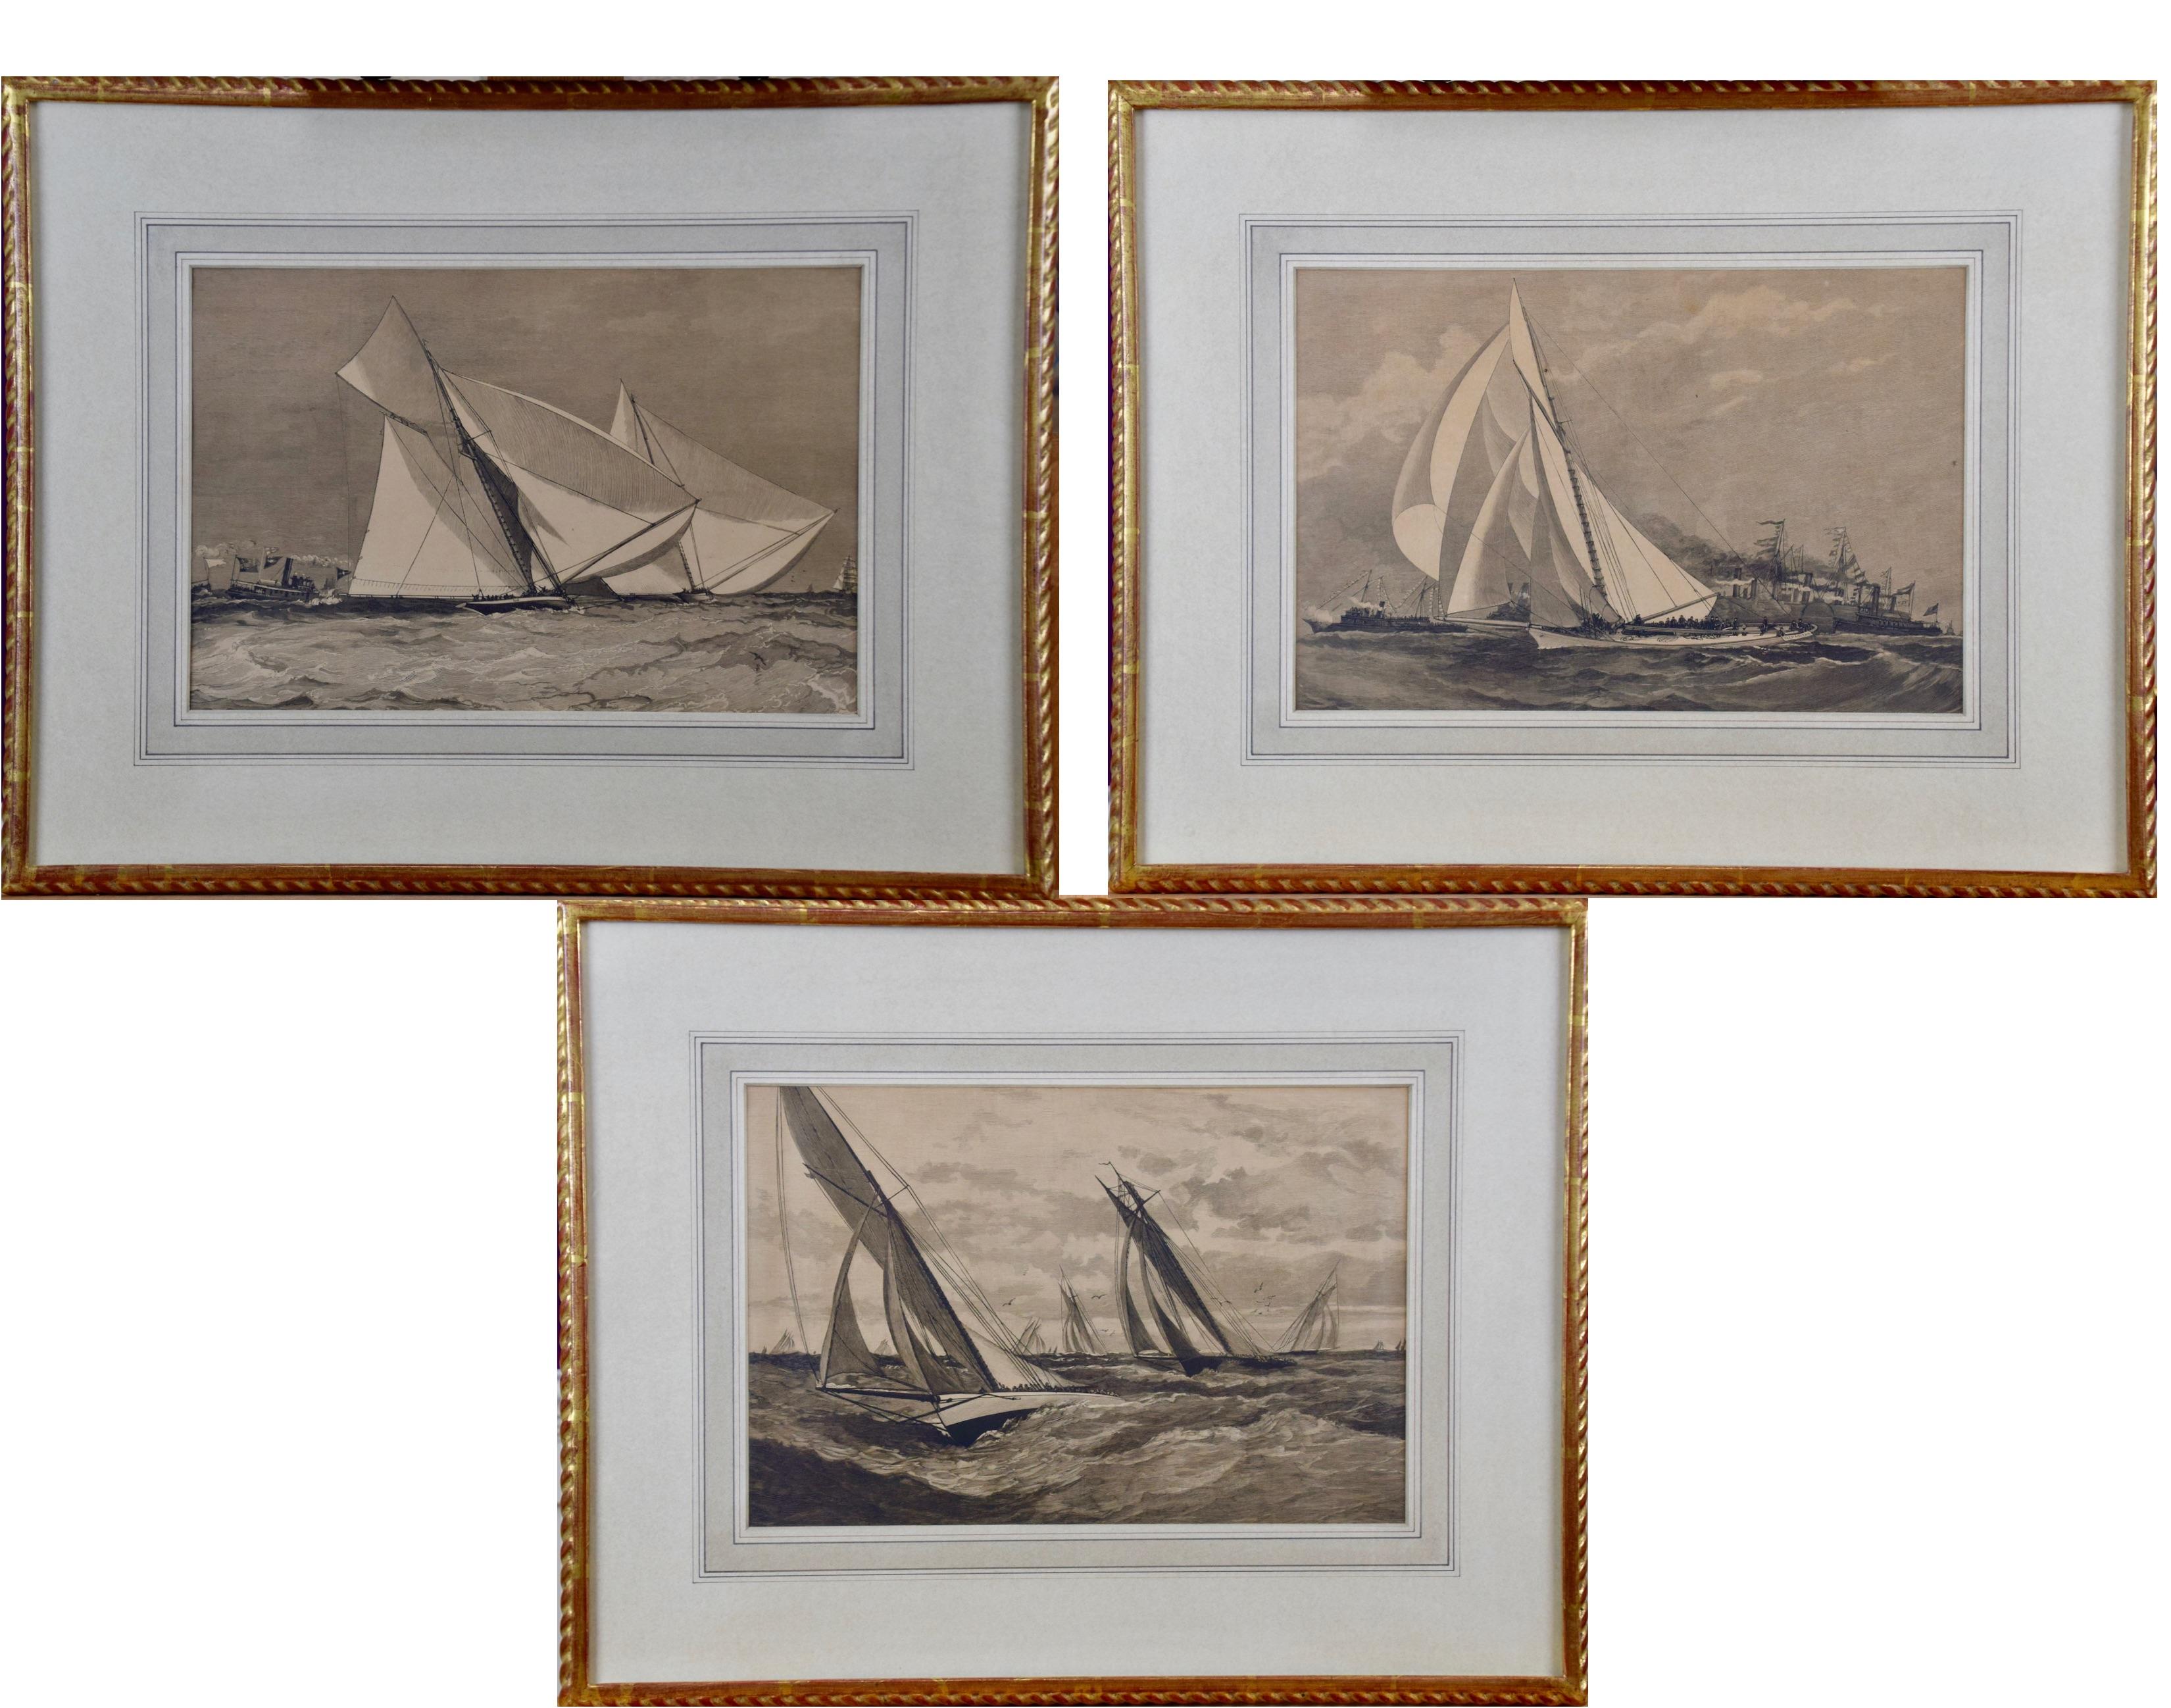 Three Engravings Depicting Sailing Yachts Competing in 1885 America's Cup Trials